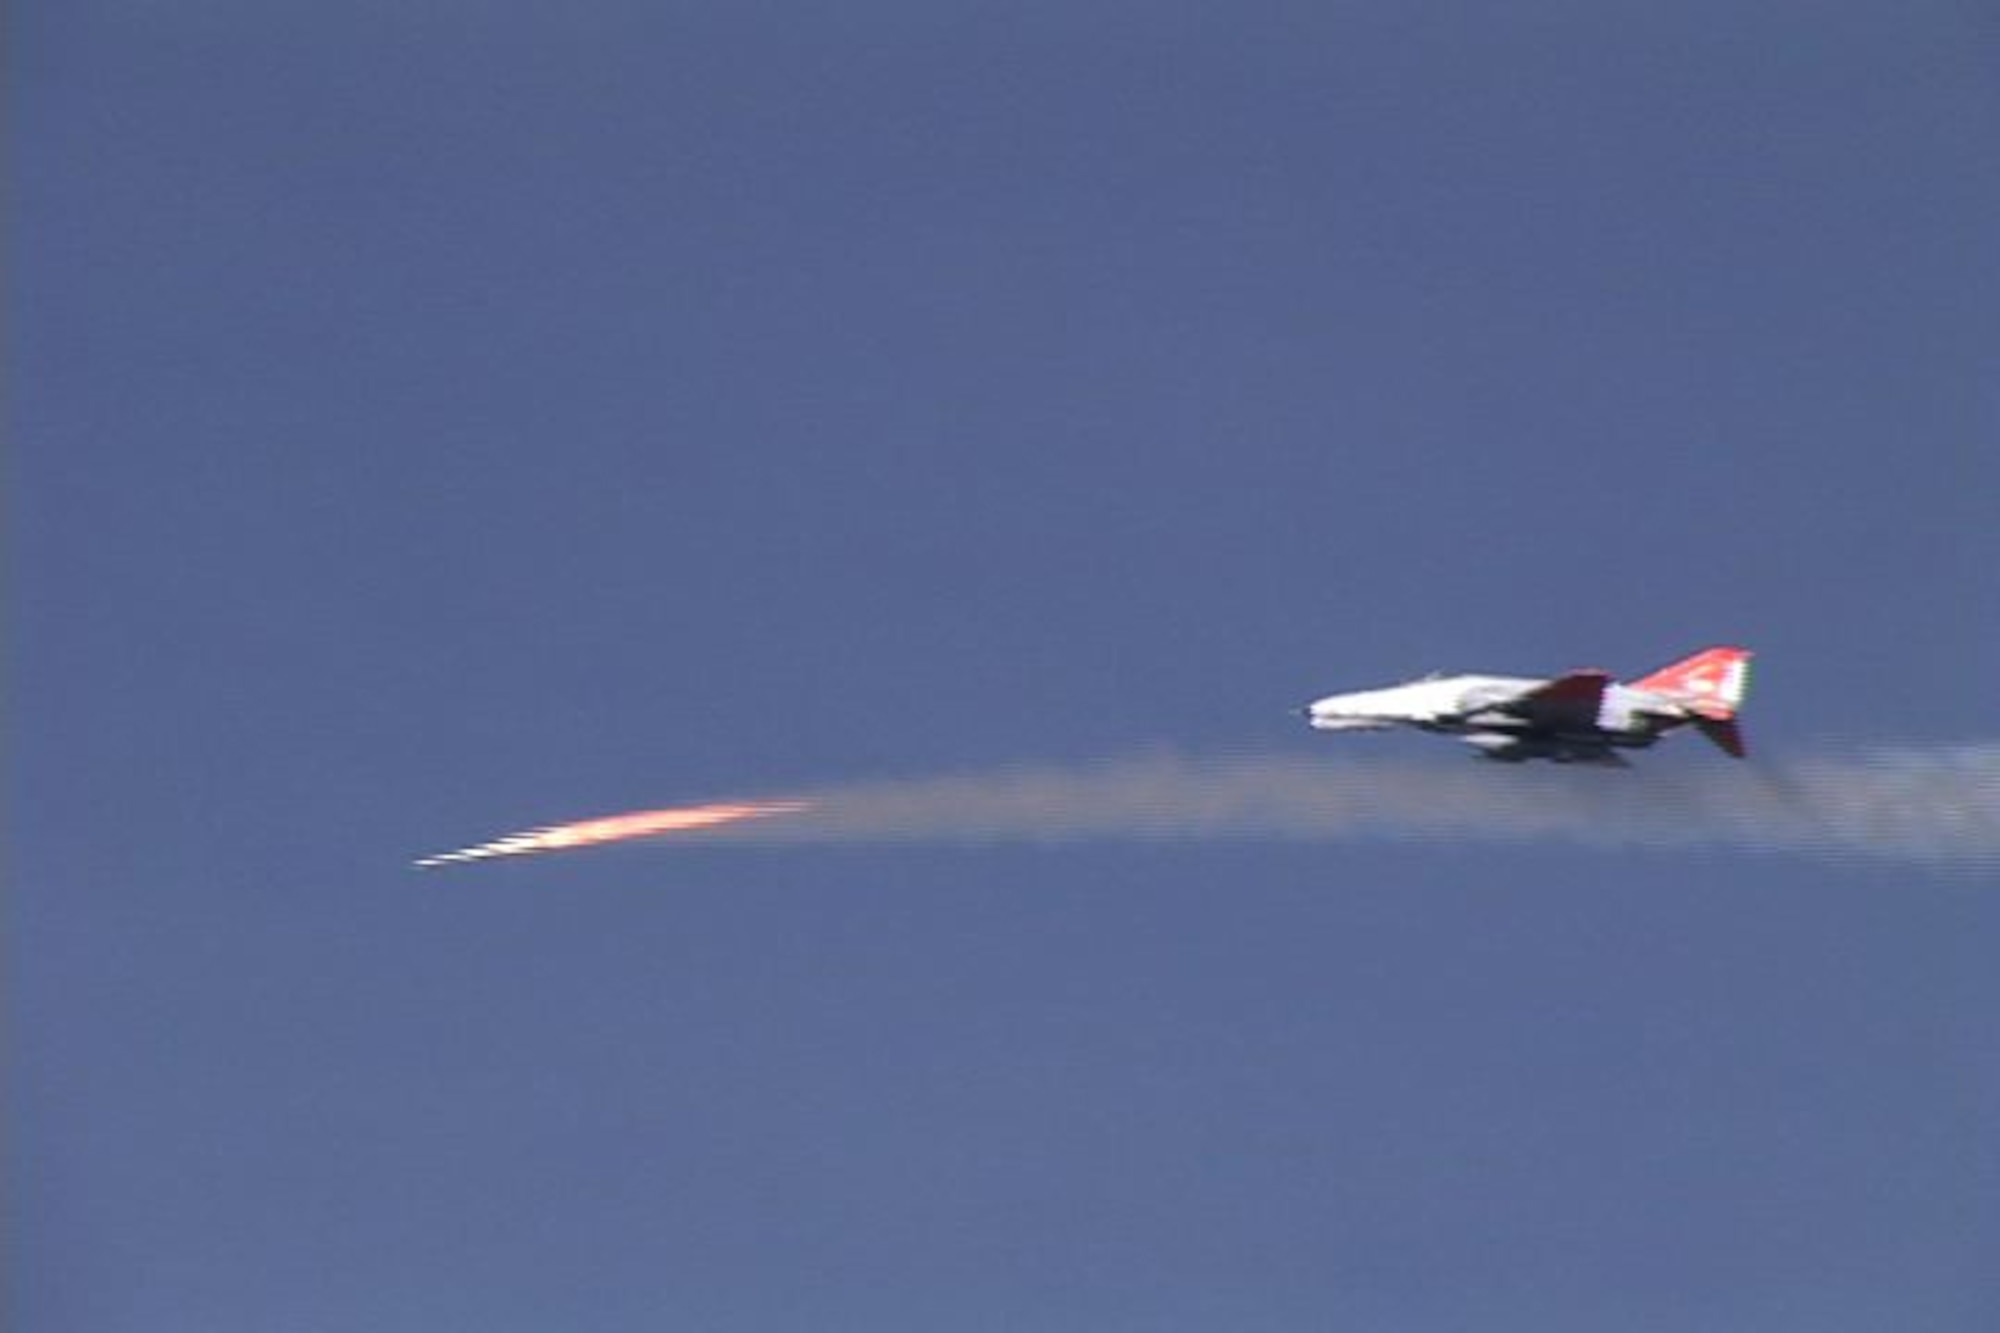 The QF-4 drone launchs a missile over White Sands Missile Range, N.M. on Jan. 09, 2008. This was the first air to ground missile fired off the unmanned drone. (U.S. Air Force photo courtesy of Det 1, 82 Aerial Targets Squadron)